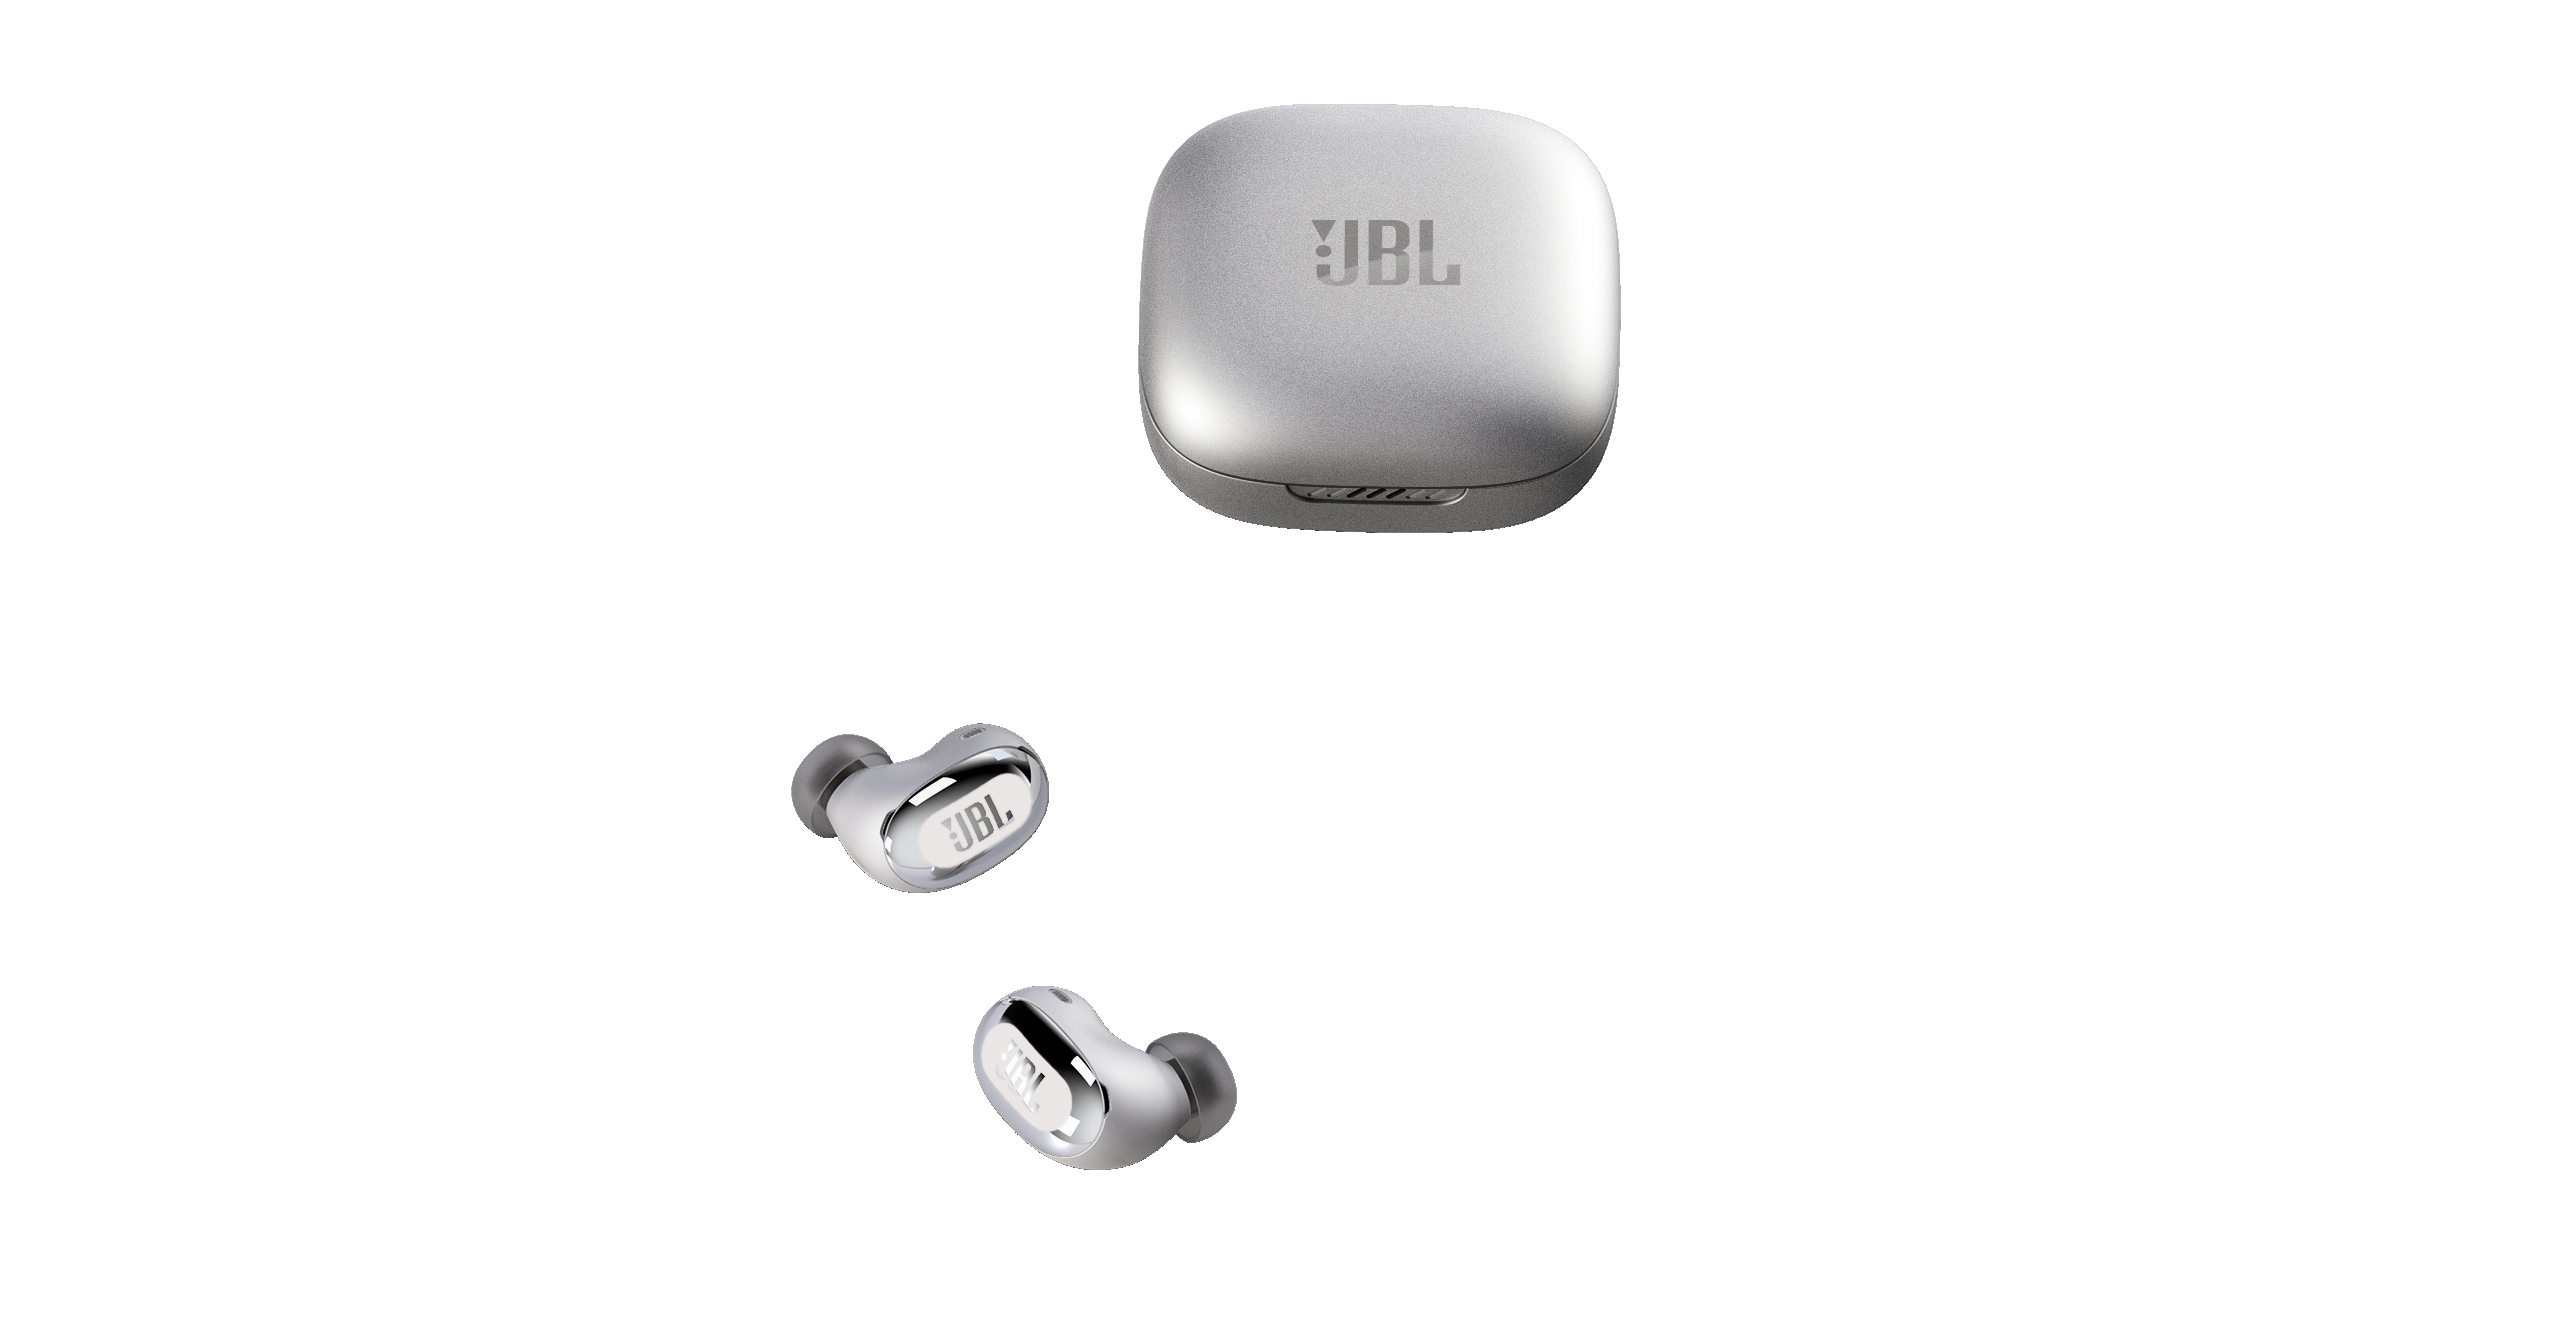 JBL Expands Eco-Edition Portfolio with JBL Go 3 and Clip 4 Portable  Speakers